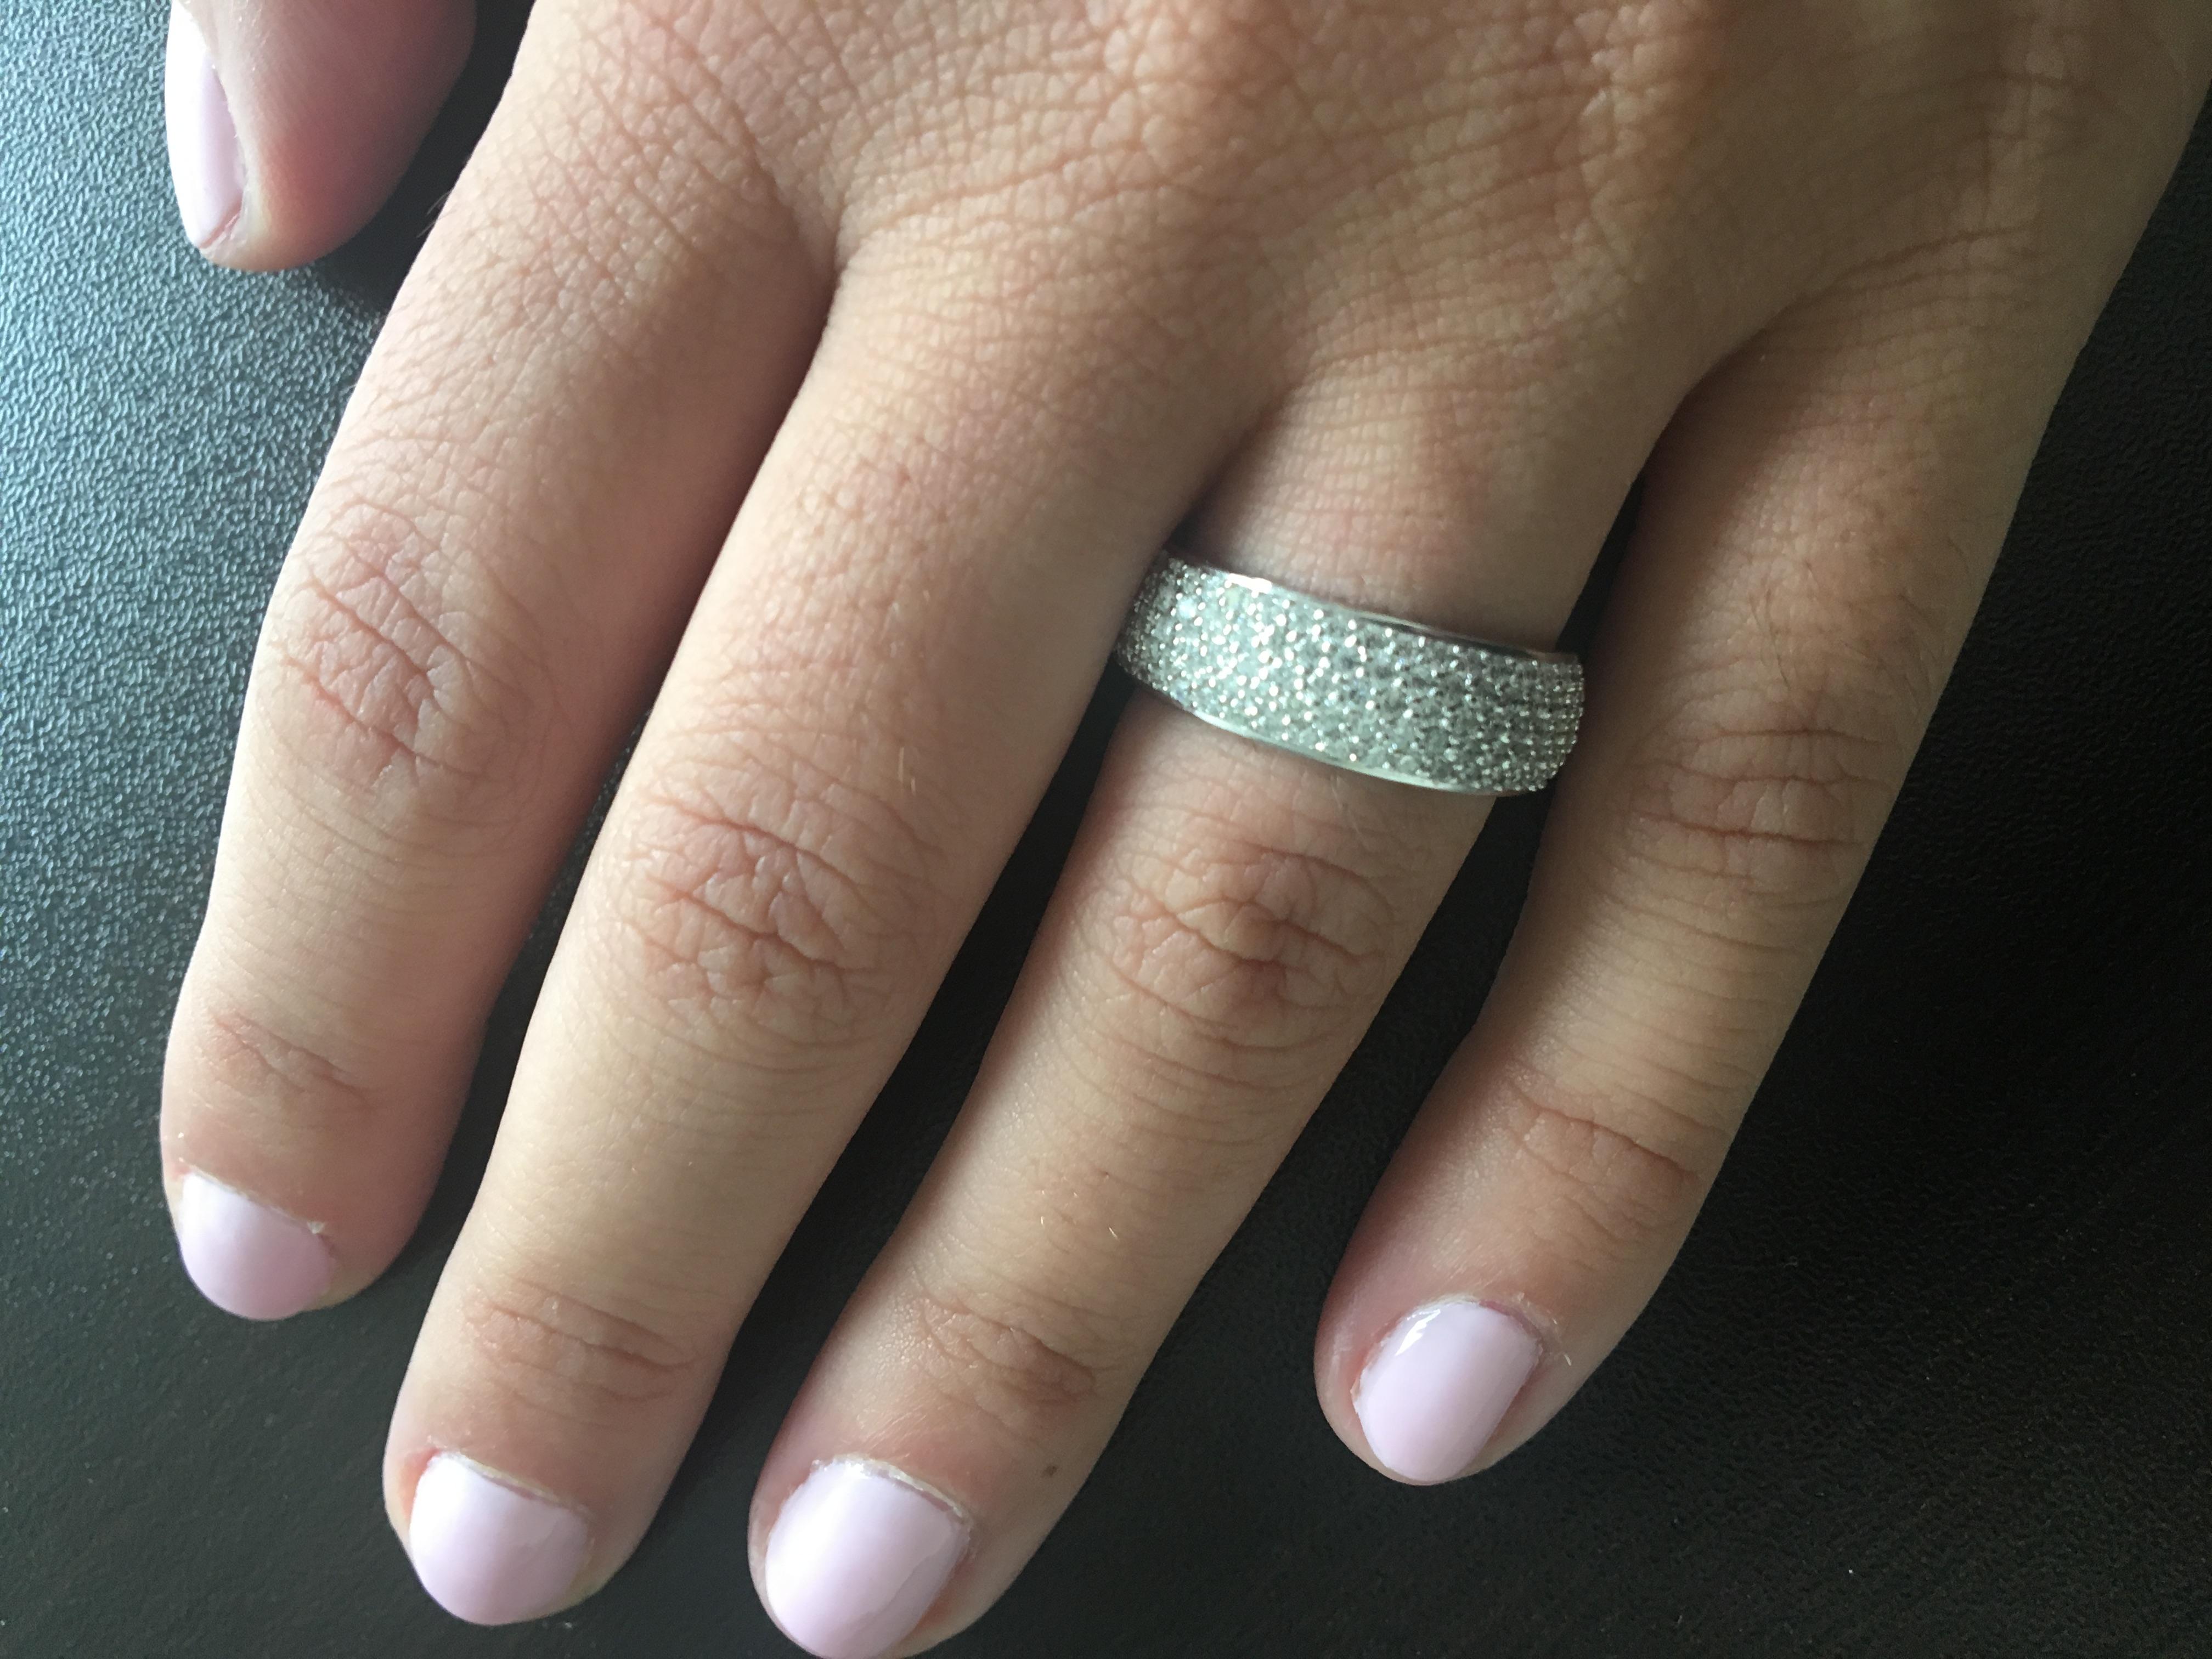 Half-way pave ring set in 14k white gold. The ring consists of 5 rows of diamonds at 0.01 carats each stone approx. The total weight is 1.10 carats. The color is G and the clarity is SI. This is a classic look that you can wear in any occasion and